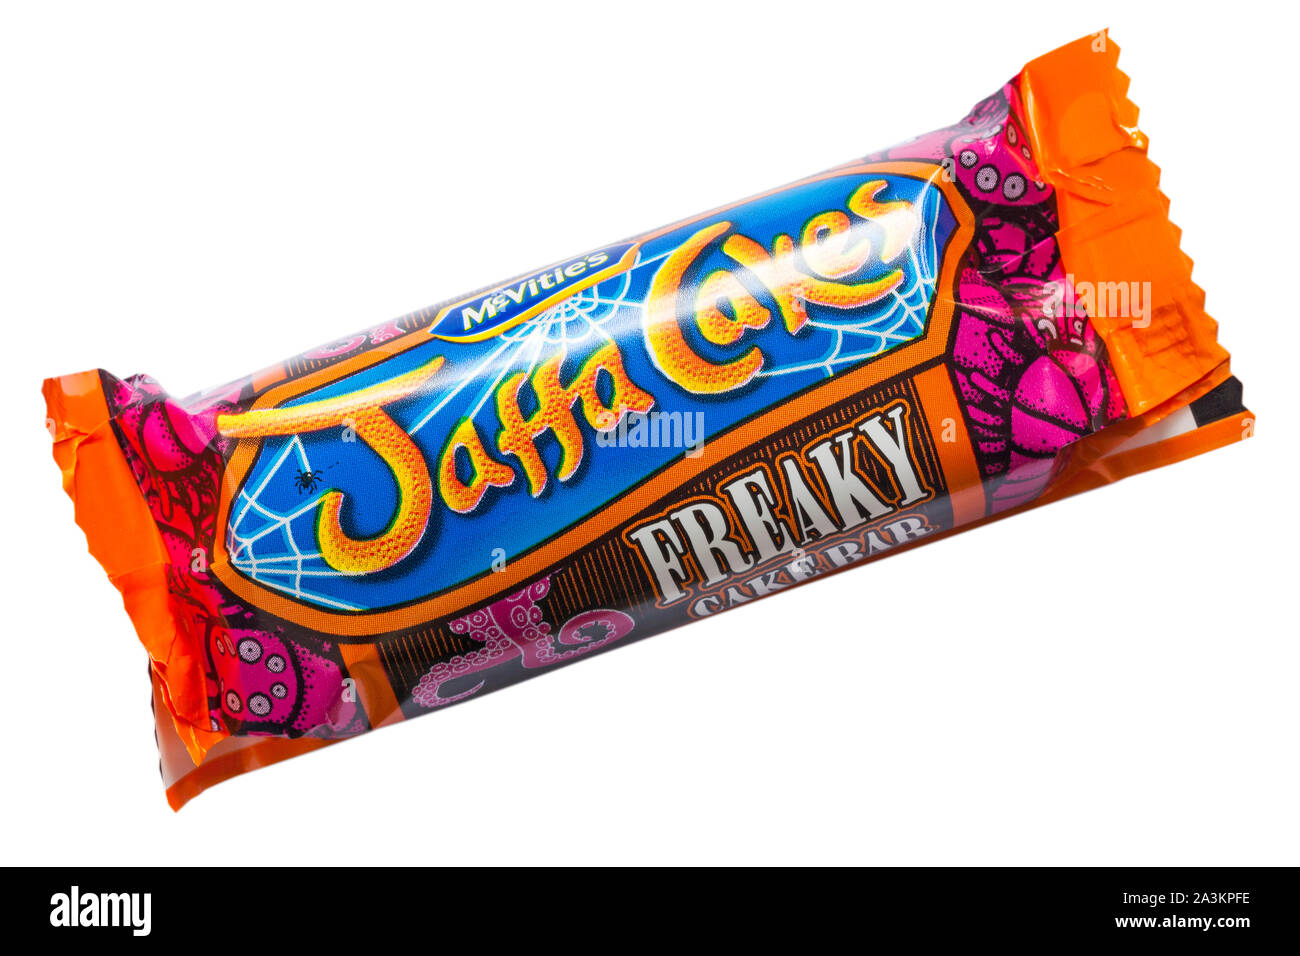 McVities Jaffa Cakes freaky cake bar ready for Halloween isolated on white background Stock Photo